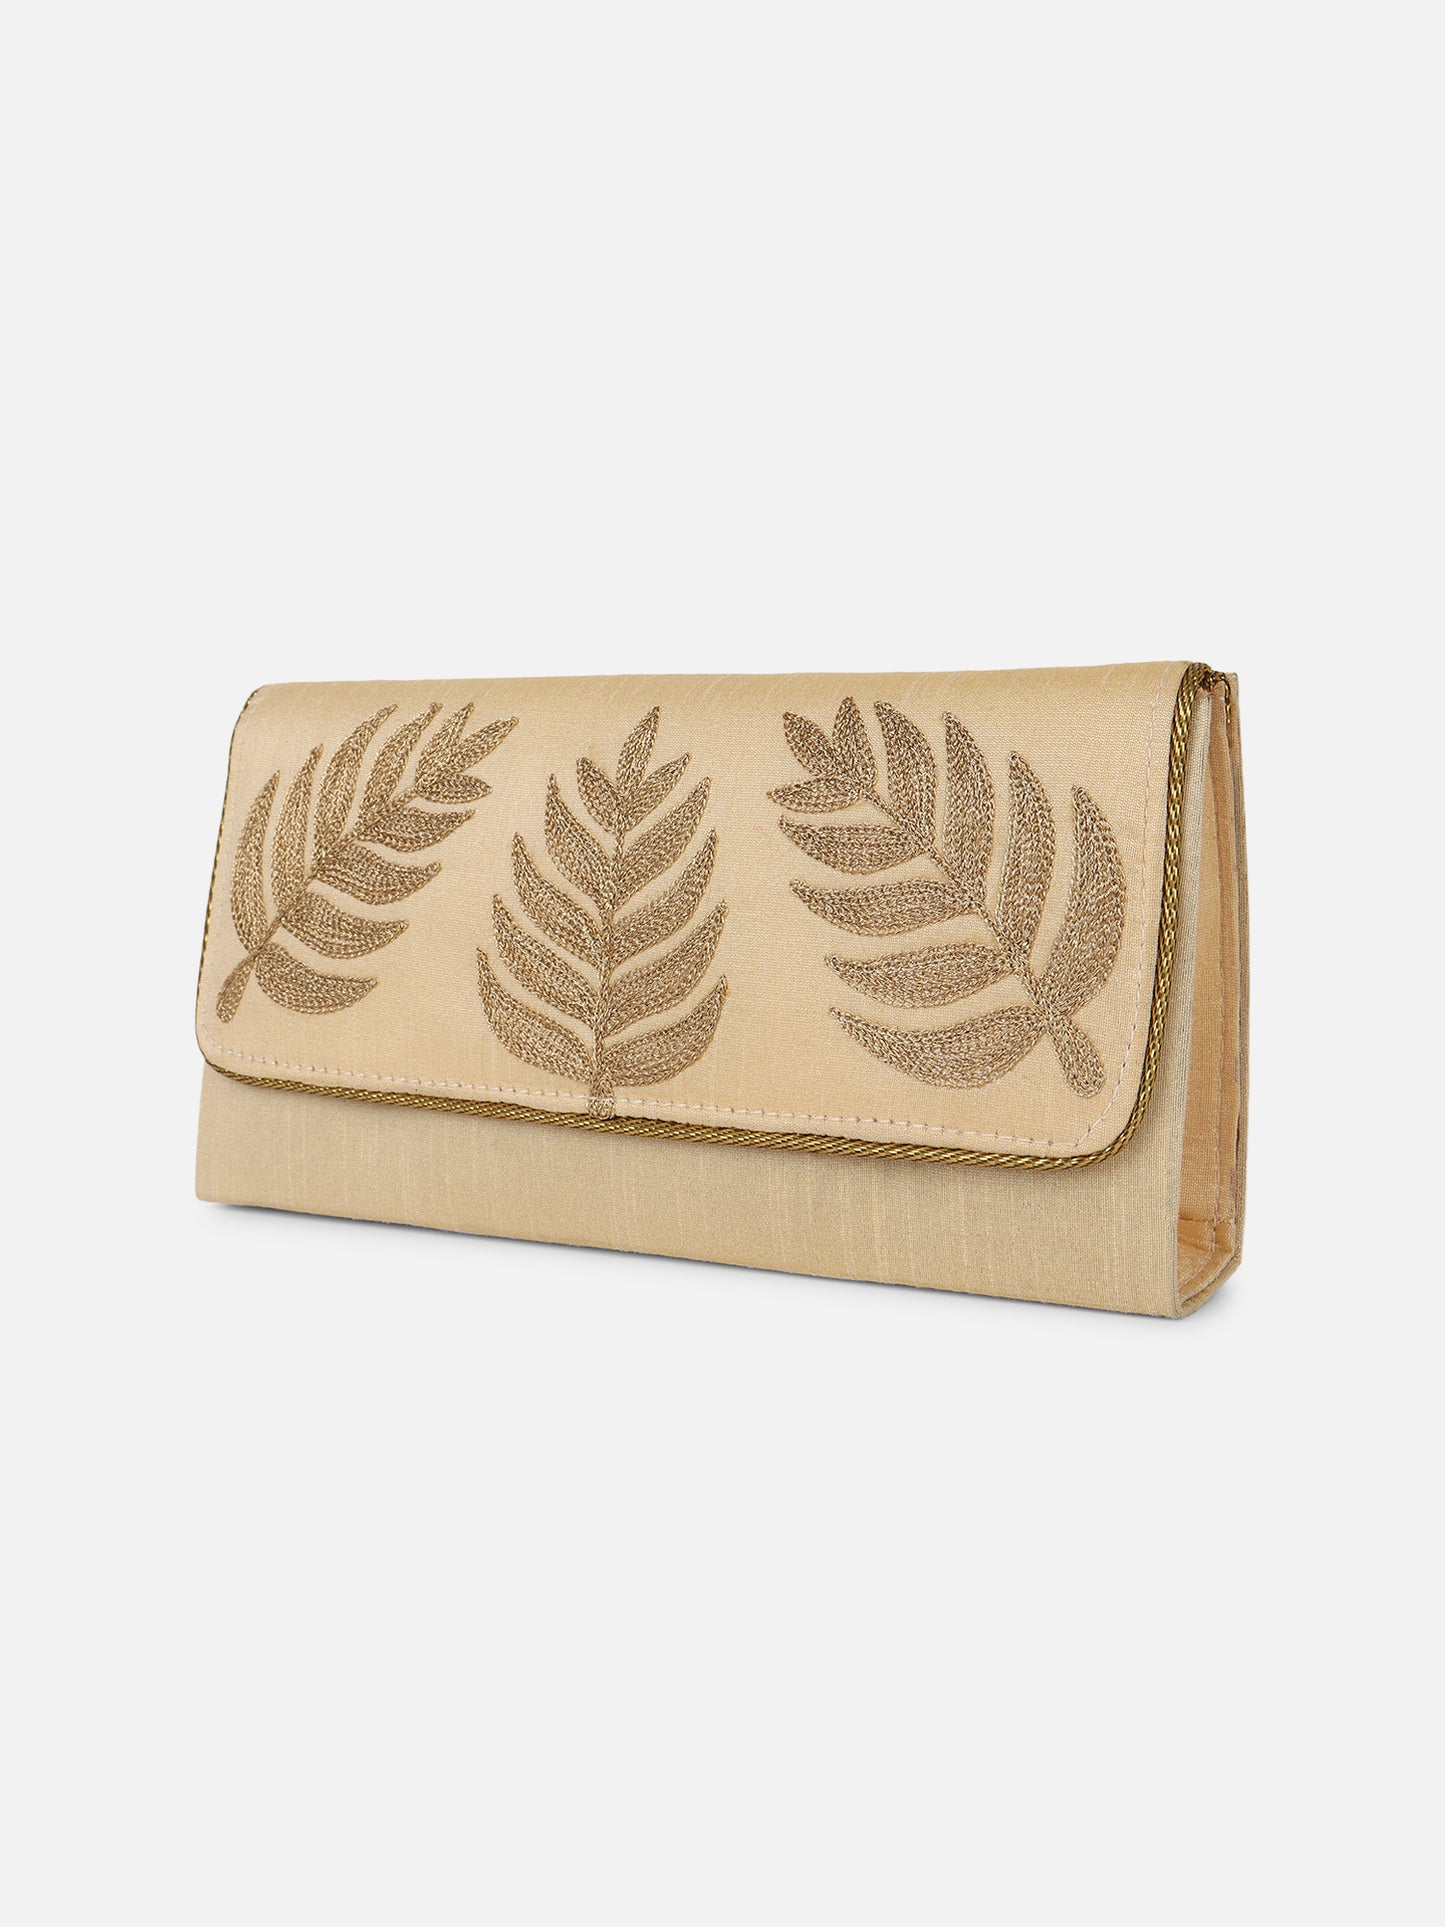 Embroidered beige fabric clutch